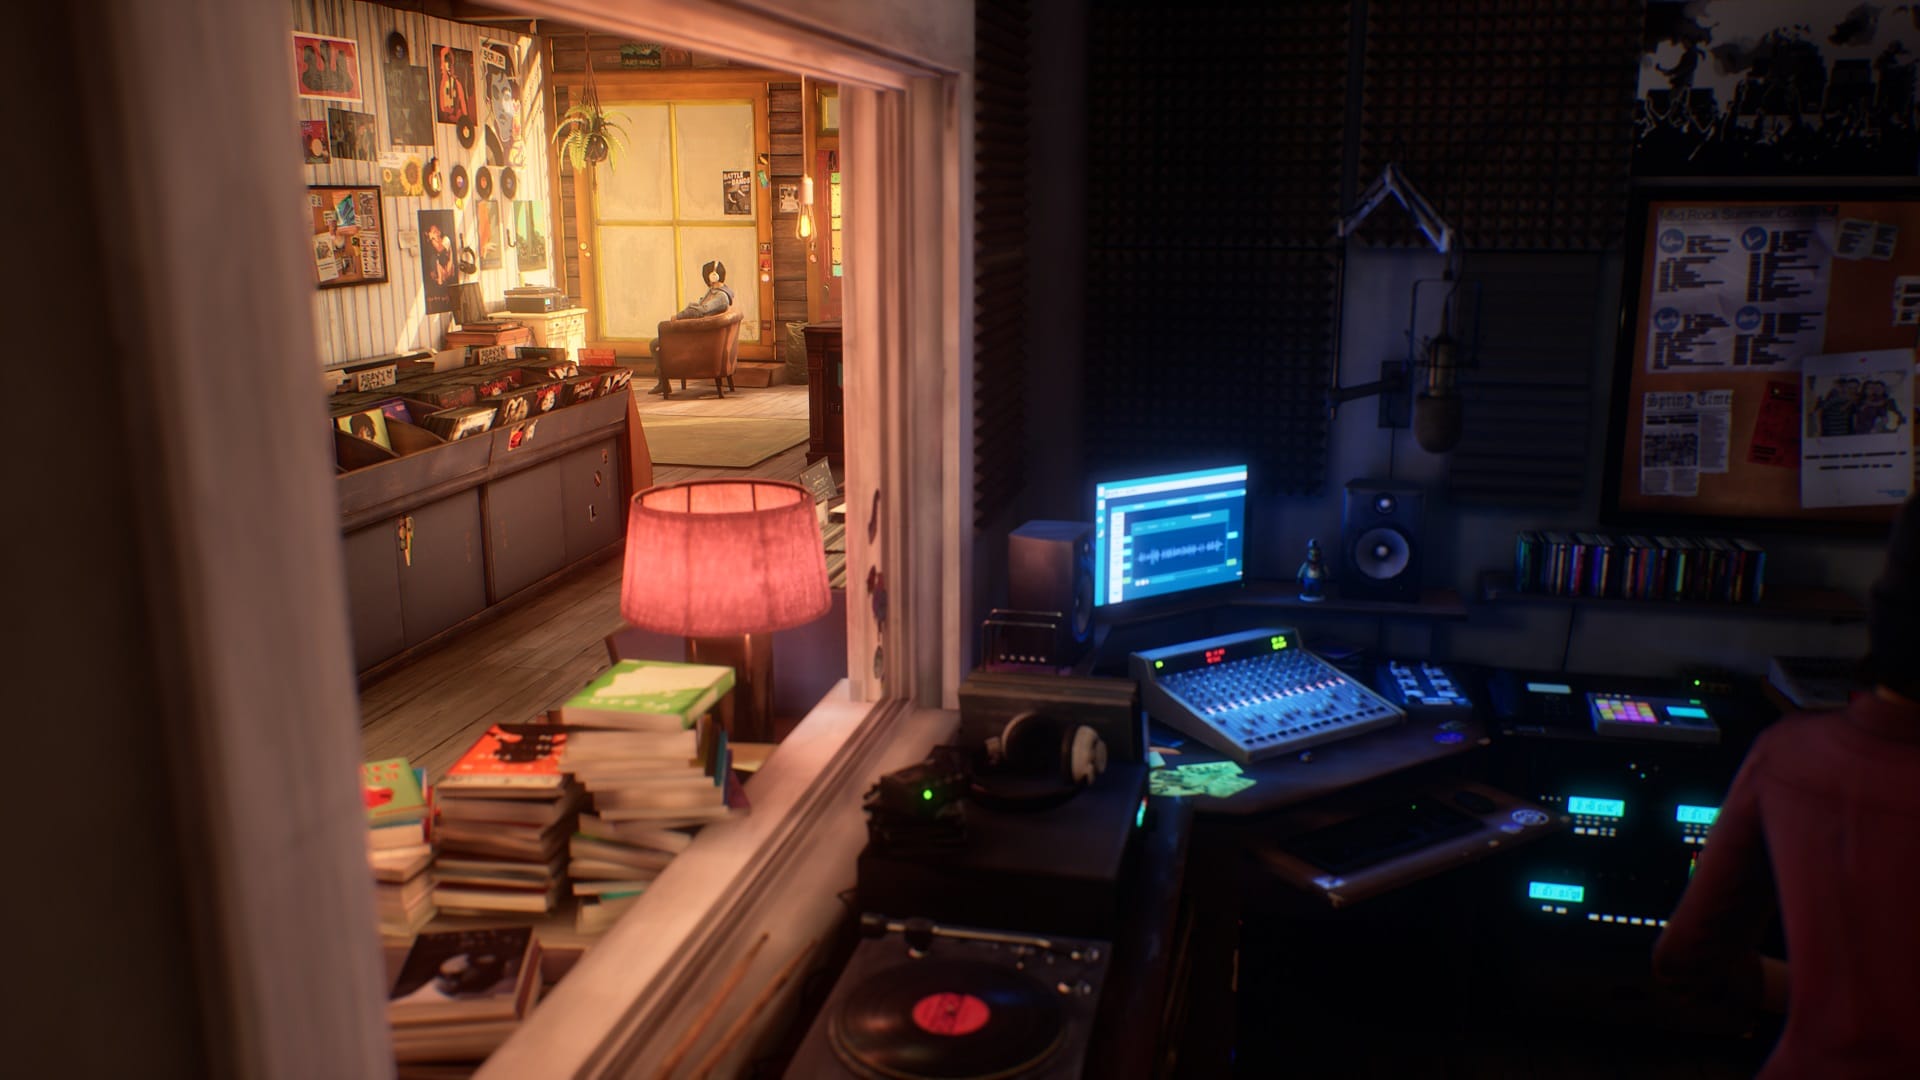 The next Life is Strange game is coming to consoles and PC on September 10th